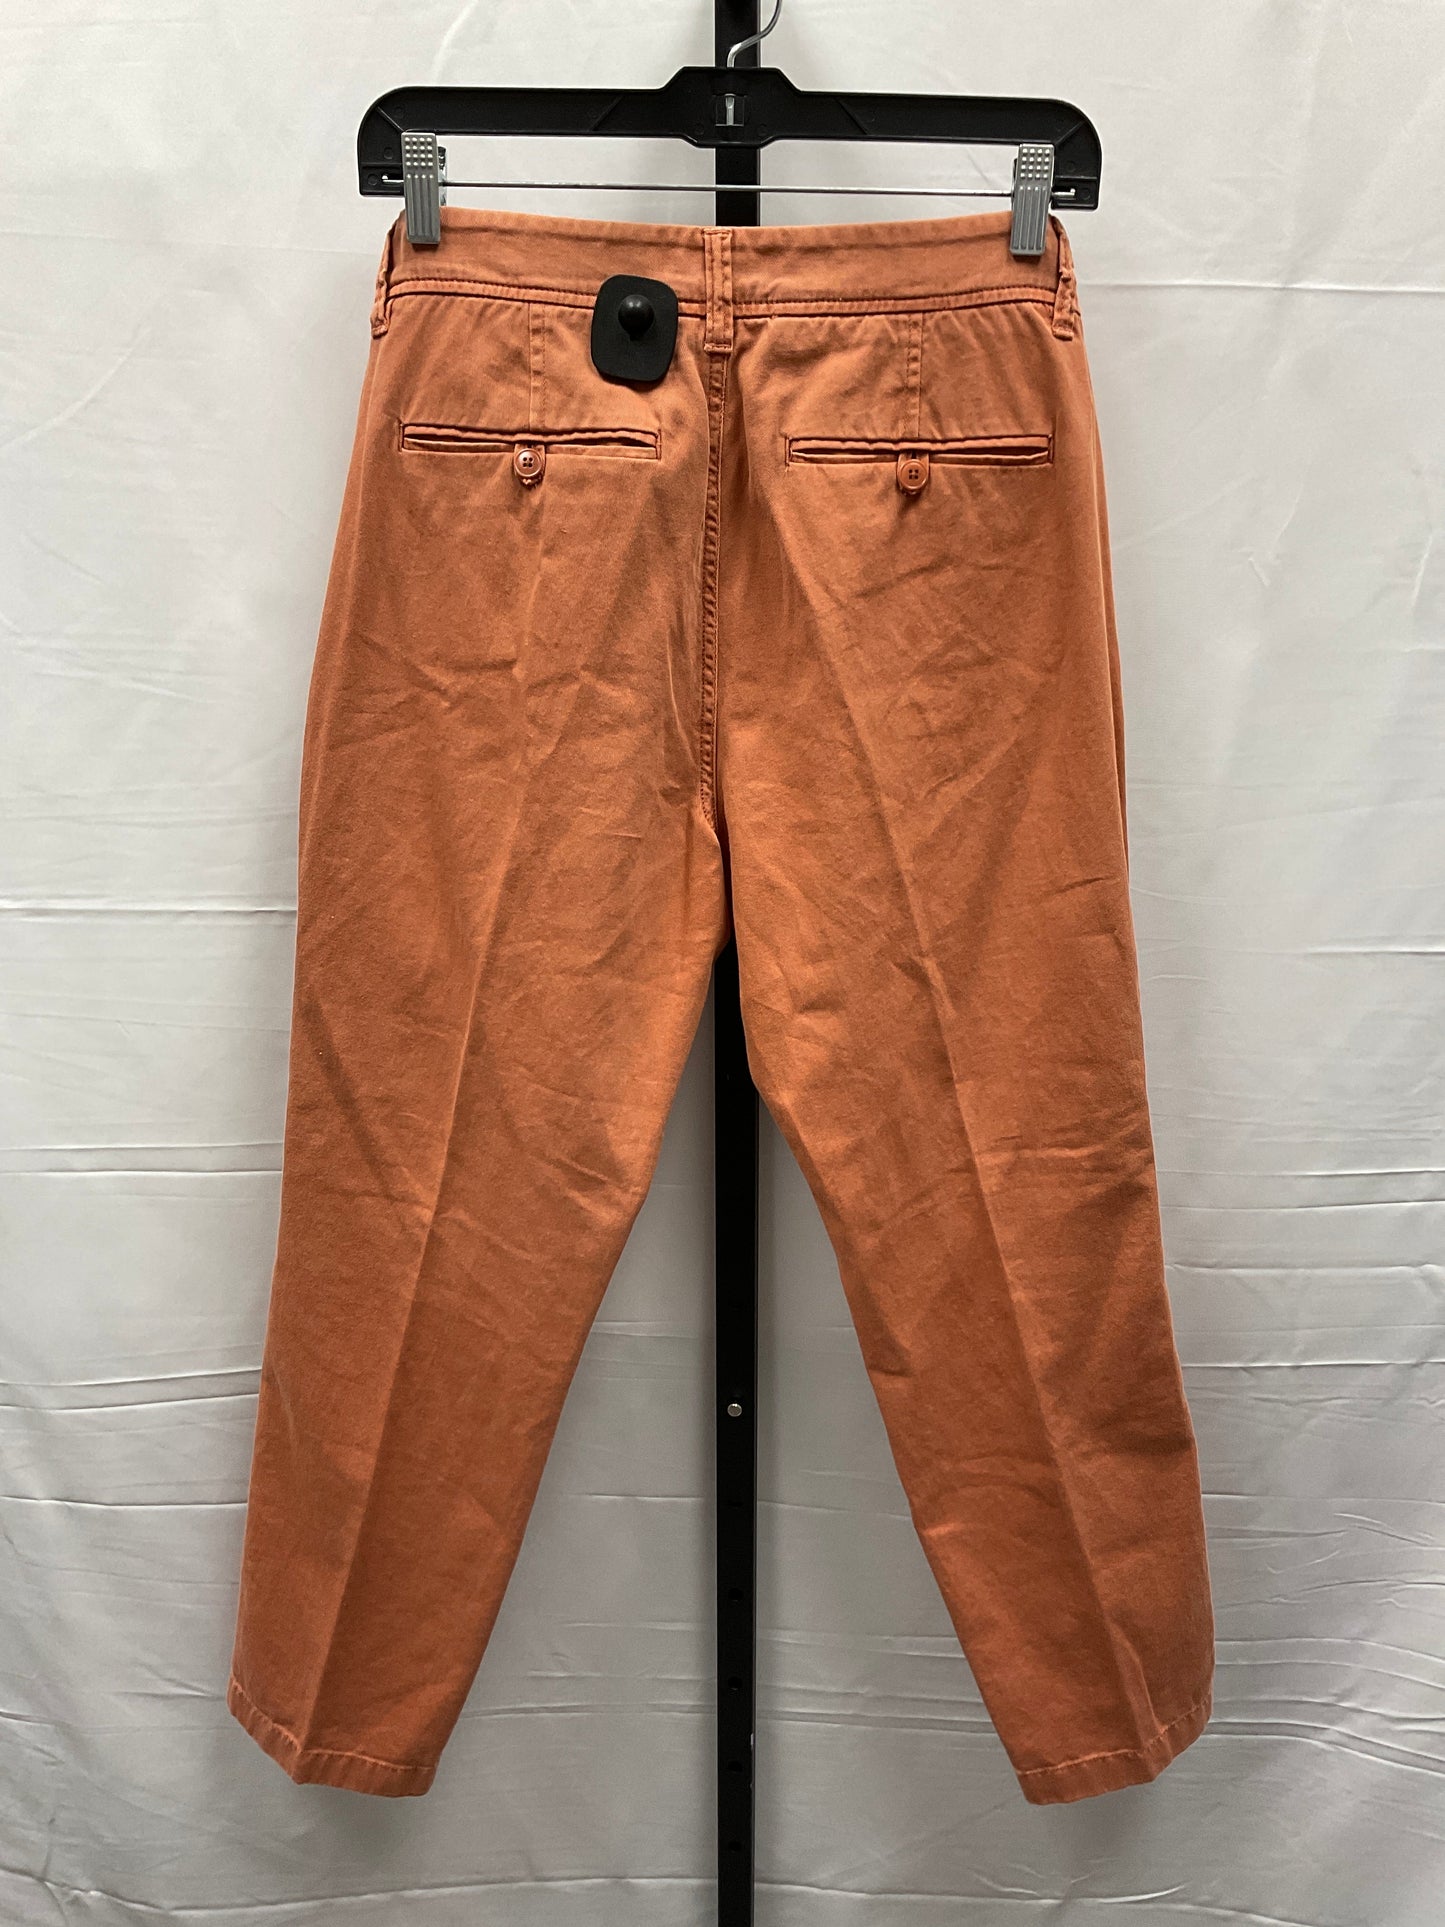 Pants Chinos & Khakis By J. Crew  Size: 4